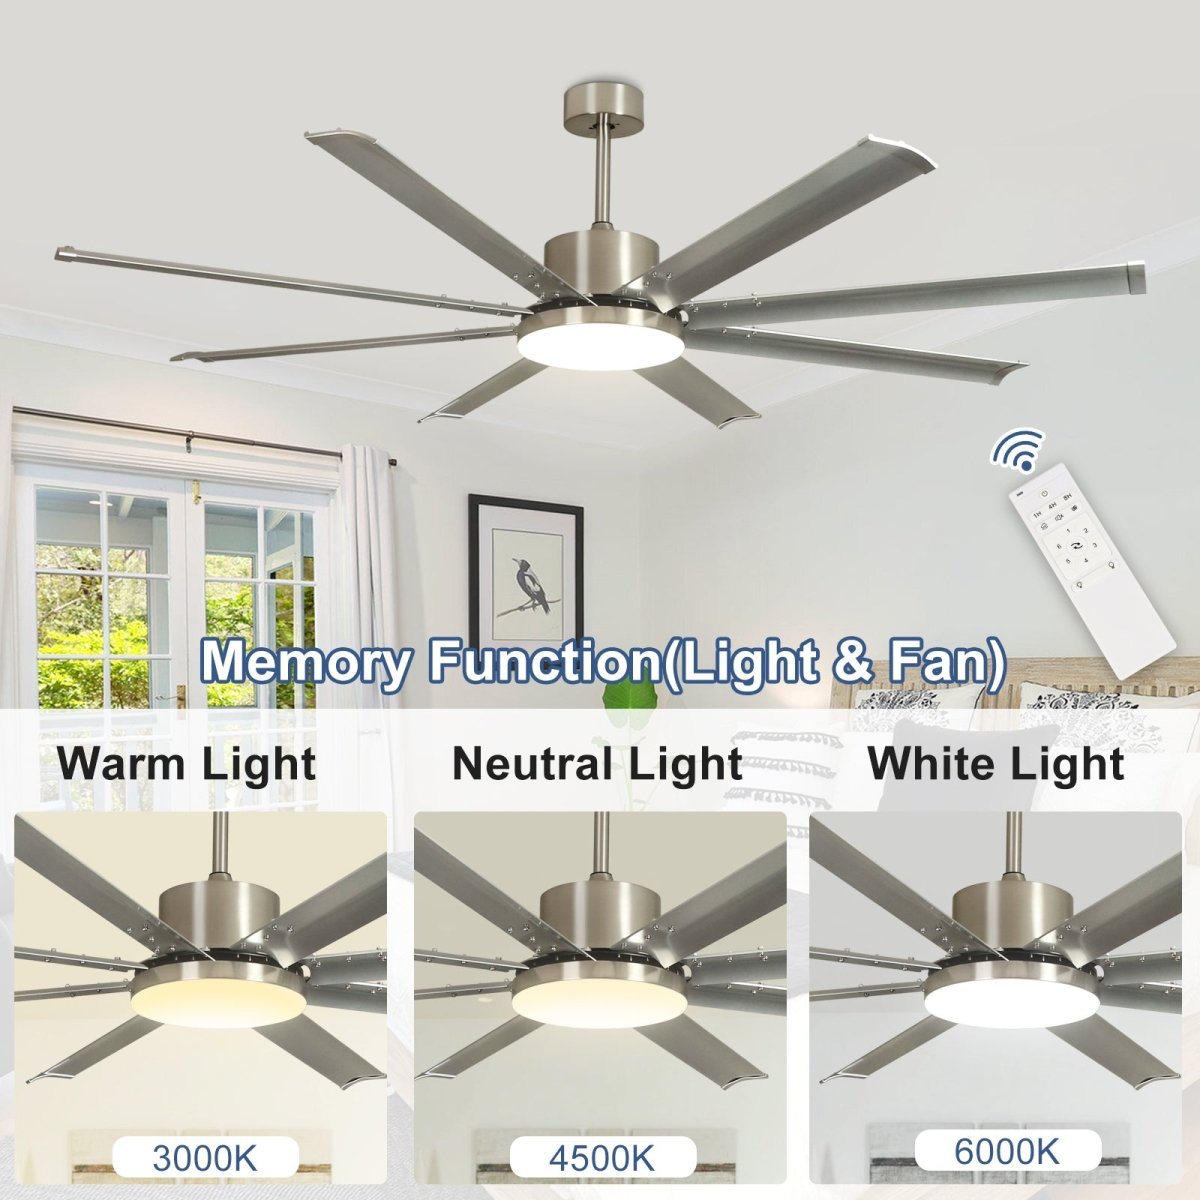 80" Ceiling Fans with Lights and Remote, 8 Aluminum Blades Sand Nickel & Silver Ceiling Fans, 6-Speed DC Motor, Farmhouse Ceiling Fan with Light for Kitchen Living Room Bedroom Farmhouse - WS-FPZ58-24C-8-NS 3 | DEPULEY